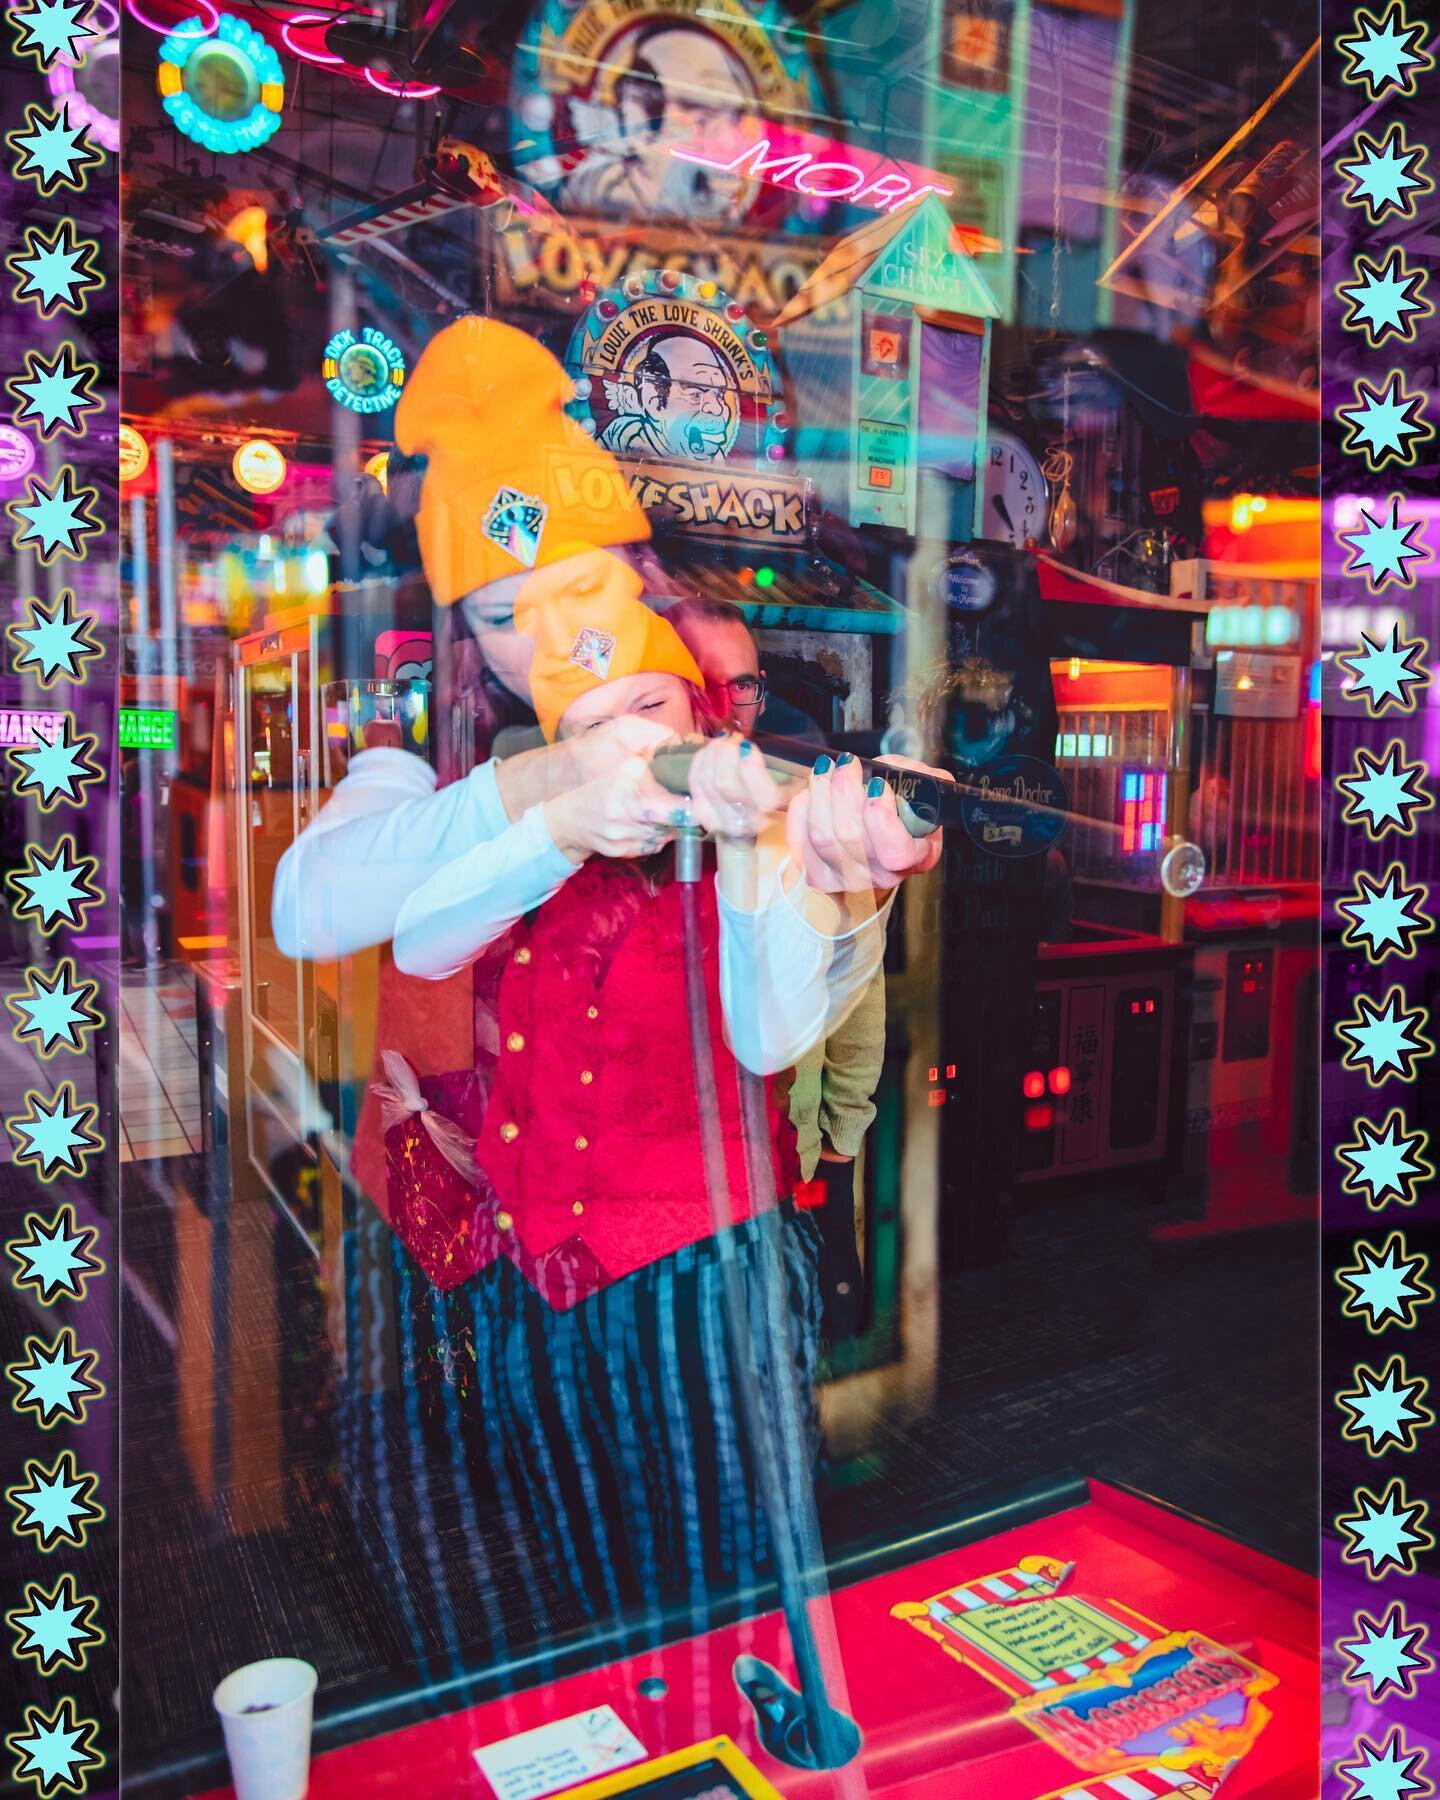 Happiness is a warm gun momma. Bang bang shoot shoot. 
&bull;
Exposing a strange arcade in #multipleexposure gonzo harmony.
&bull;
Hey kids, go spend your quarters at @marvin3m.eth 
&bull;
#doubleexposure #gonzophotography #asdetroitsown #gonzo